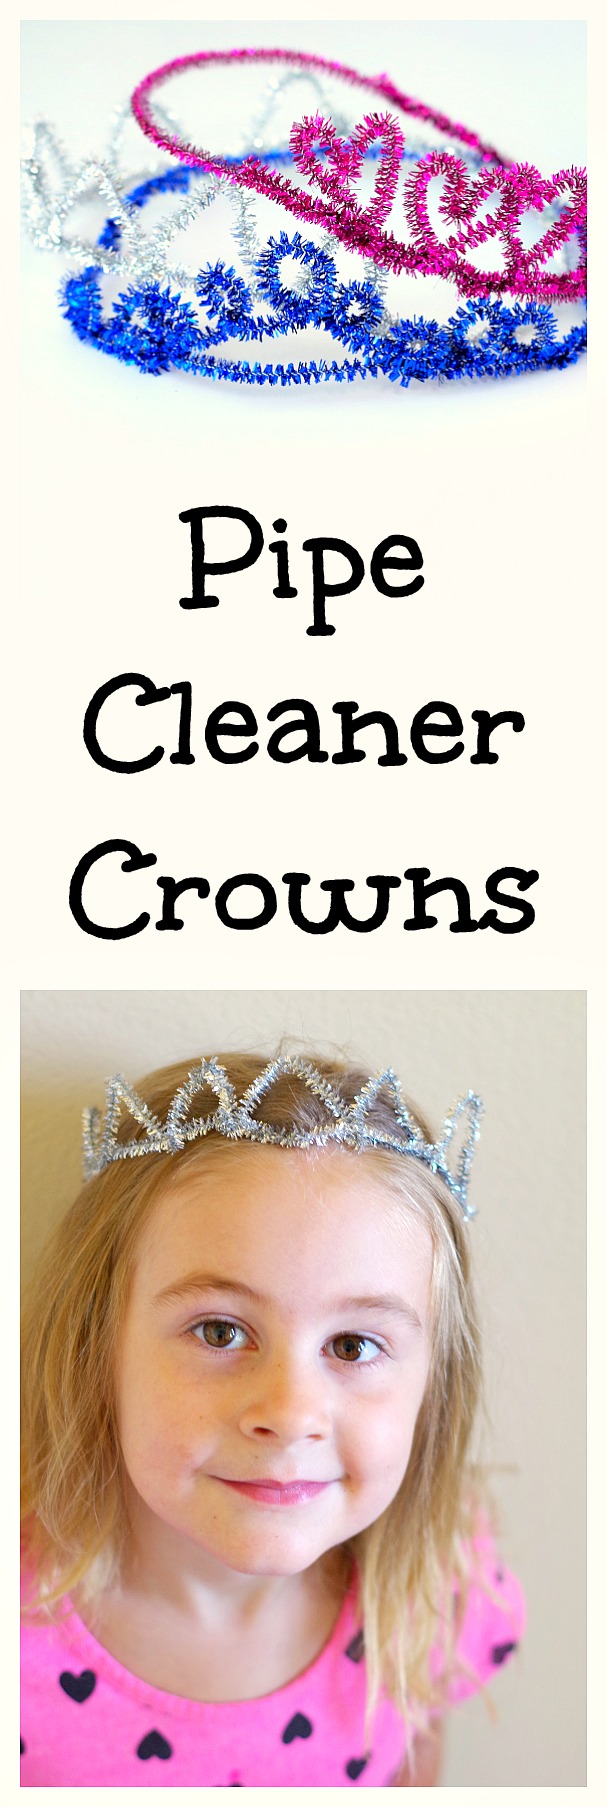 Pipe Cleaner Crowns are a simple craft for the little princess or prince. Also a fun party craft for kids and all you need to make them are pipe cleaners!